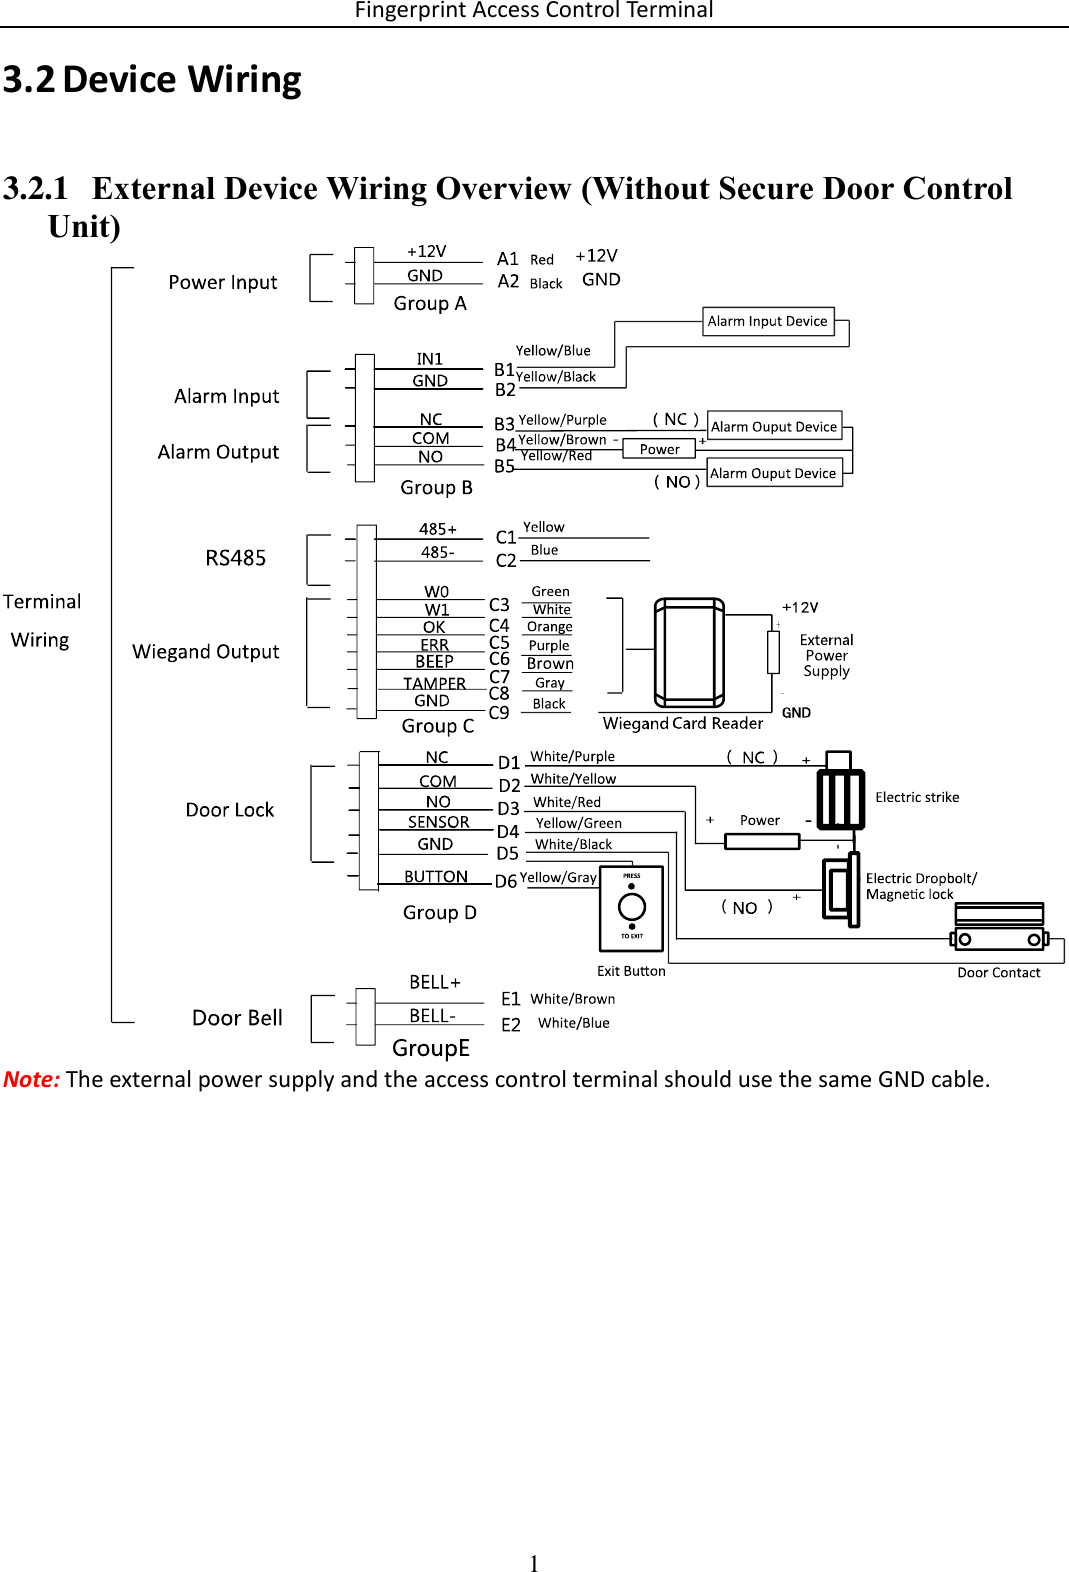 Fingerprint Access Control Terminal 1   Device Wiring 3.23.2.1 External Device Wiring Overview (Without Secure Door Control Unit)  Note: The external power supply and the access control terminal should use the same GND cable.     